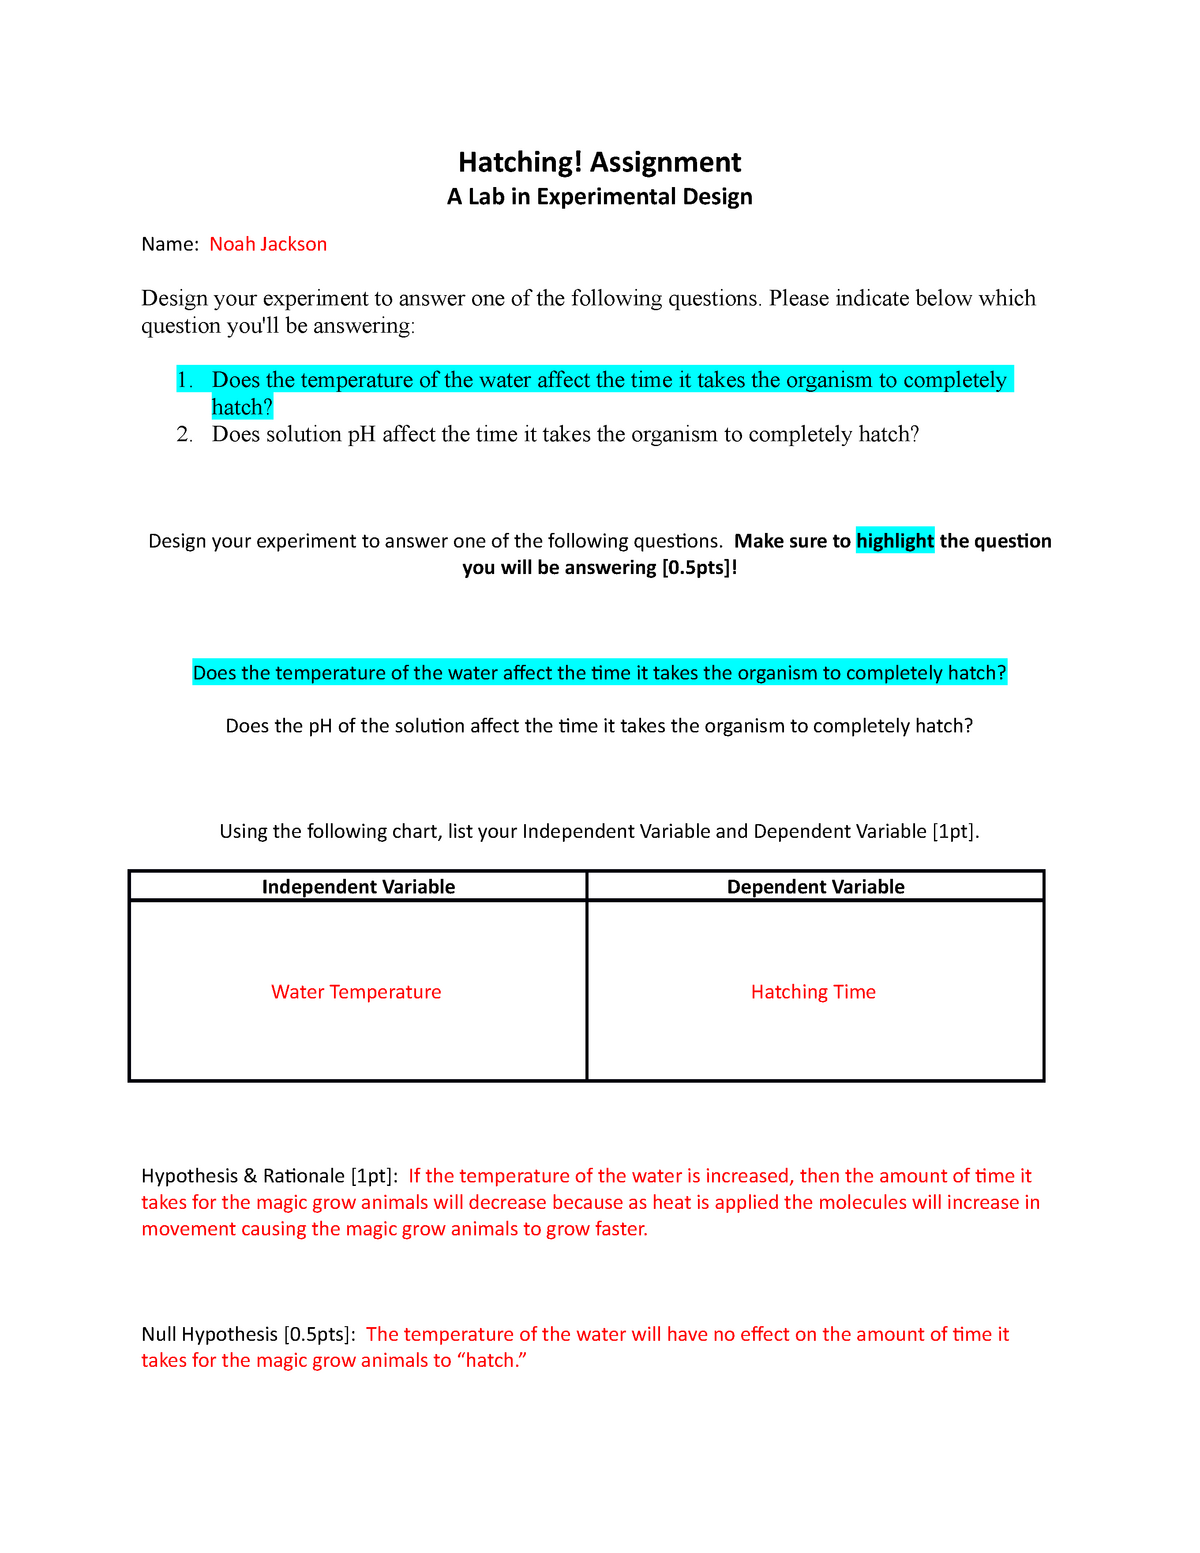 BIOL2222 Lab22 - worksheet - Hatching! Assignment A Lab in Pertaining To Experimental Design Worksheet Answers